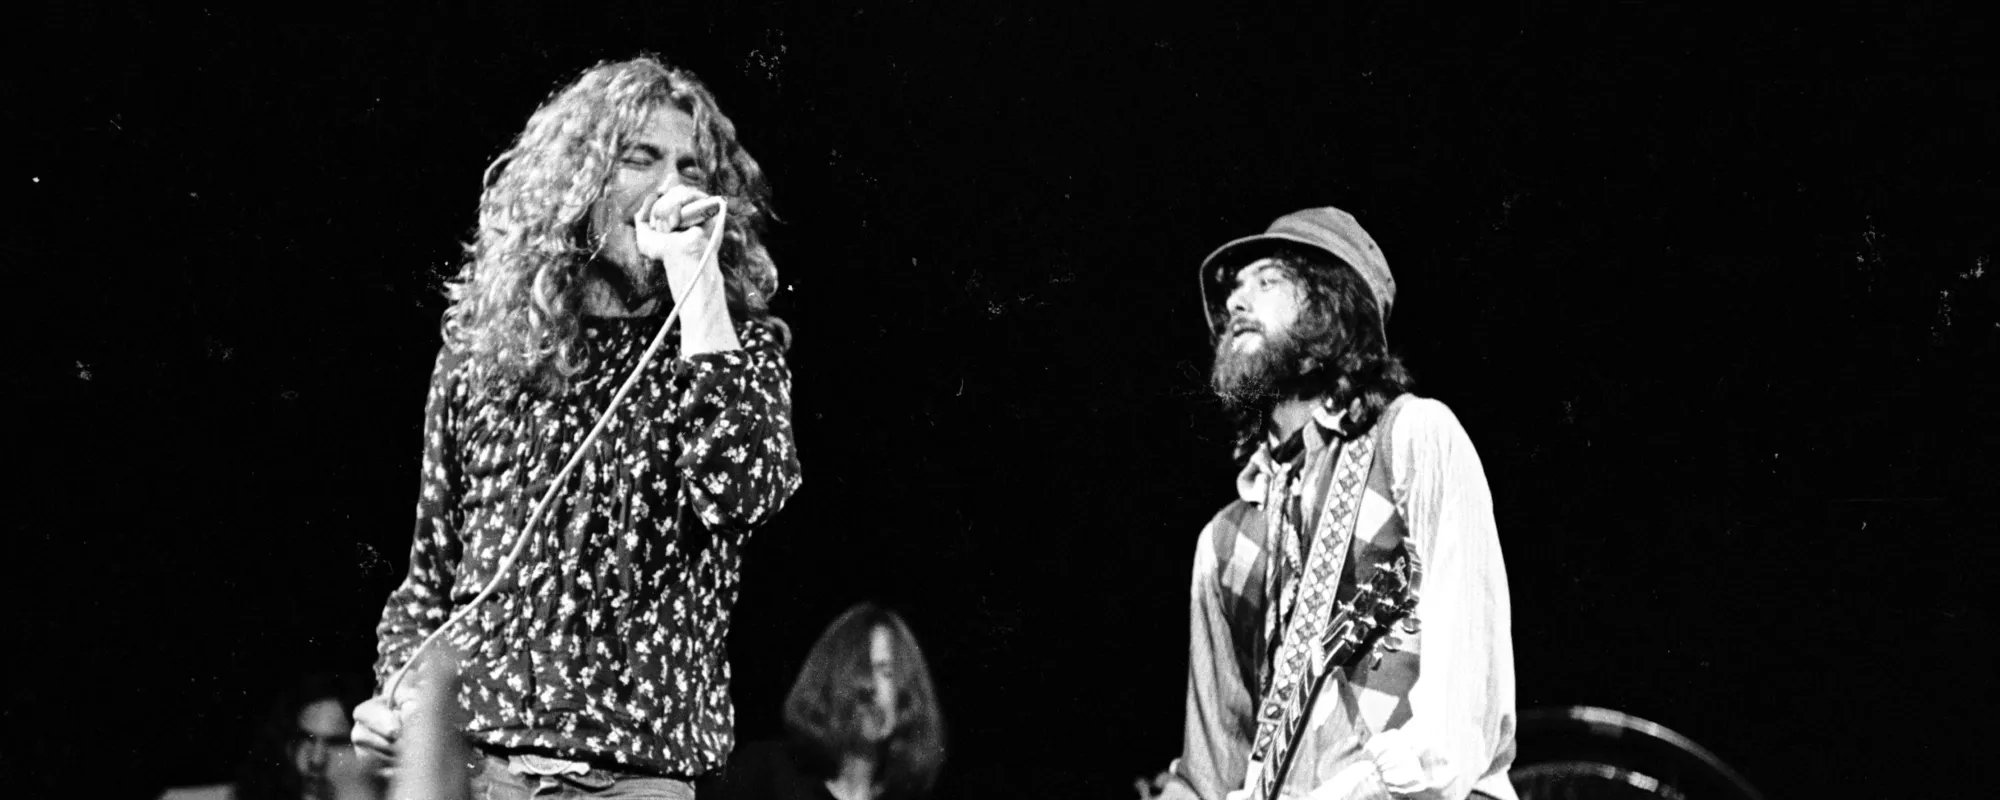 Who Wrote Led Zeppelin’s “Stairway to Heaven”?